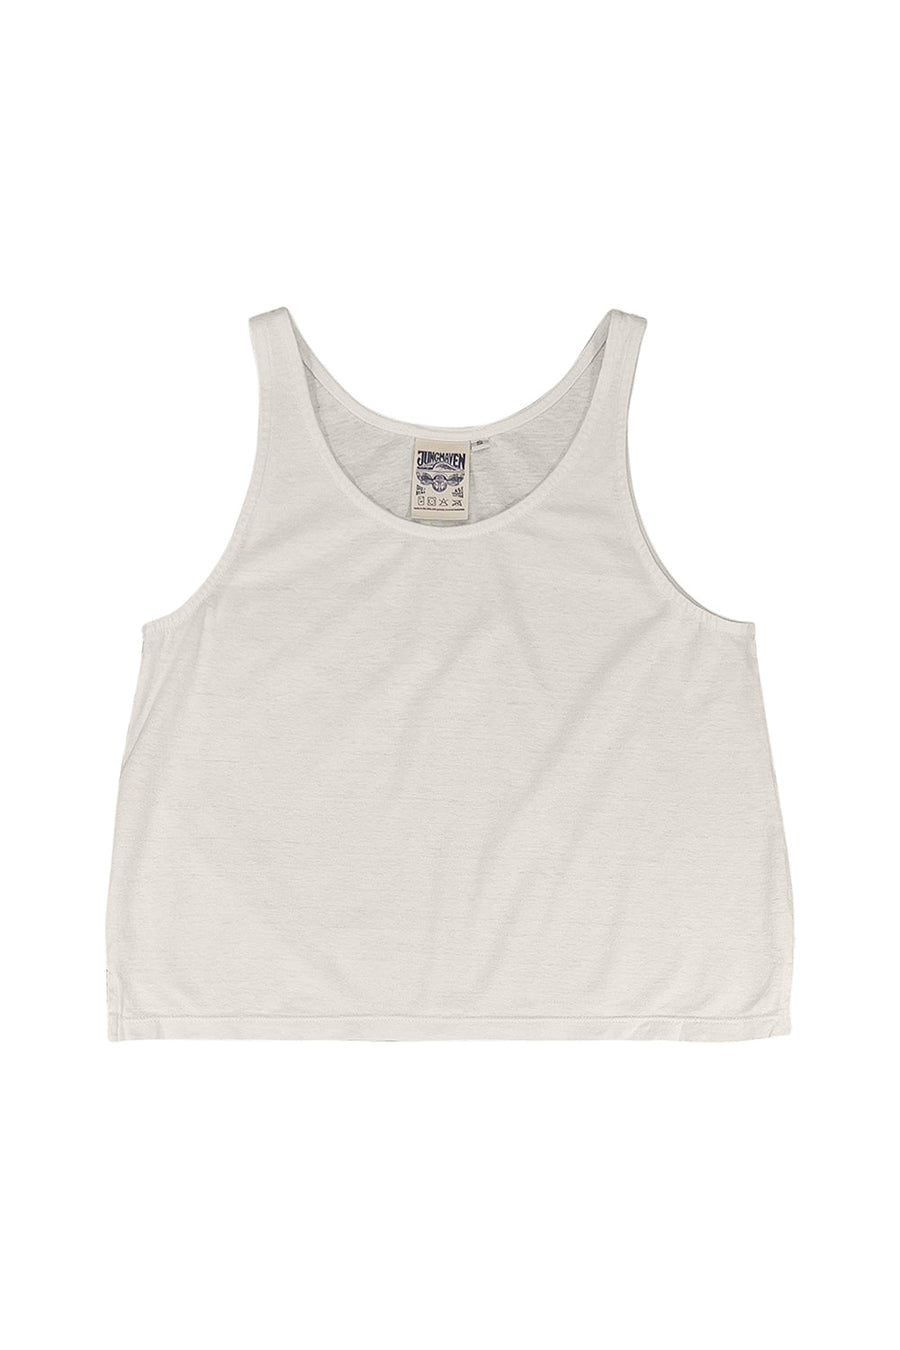 CROPPED TANK TOP - WASHED WHITE